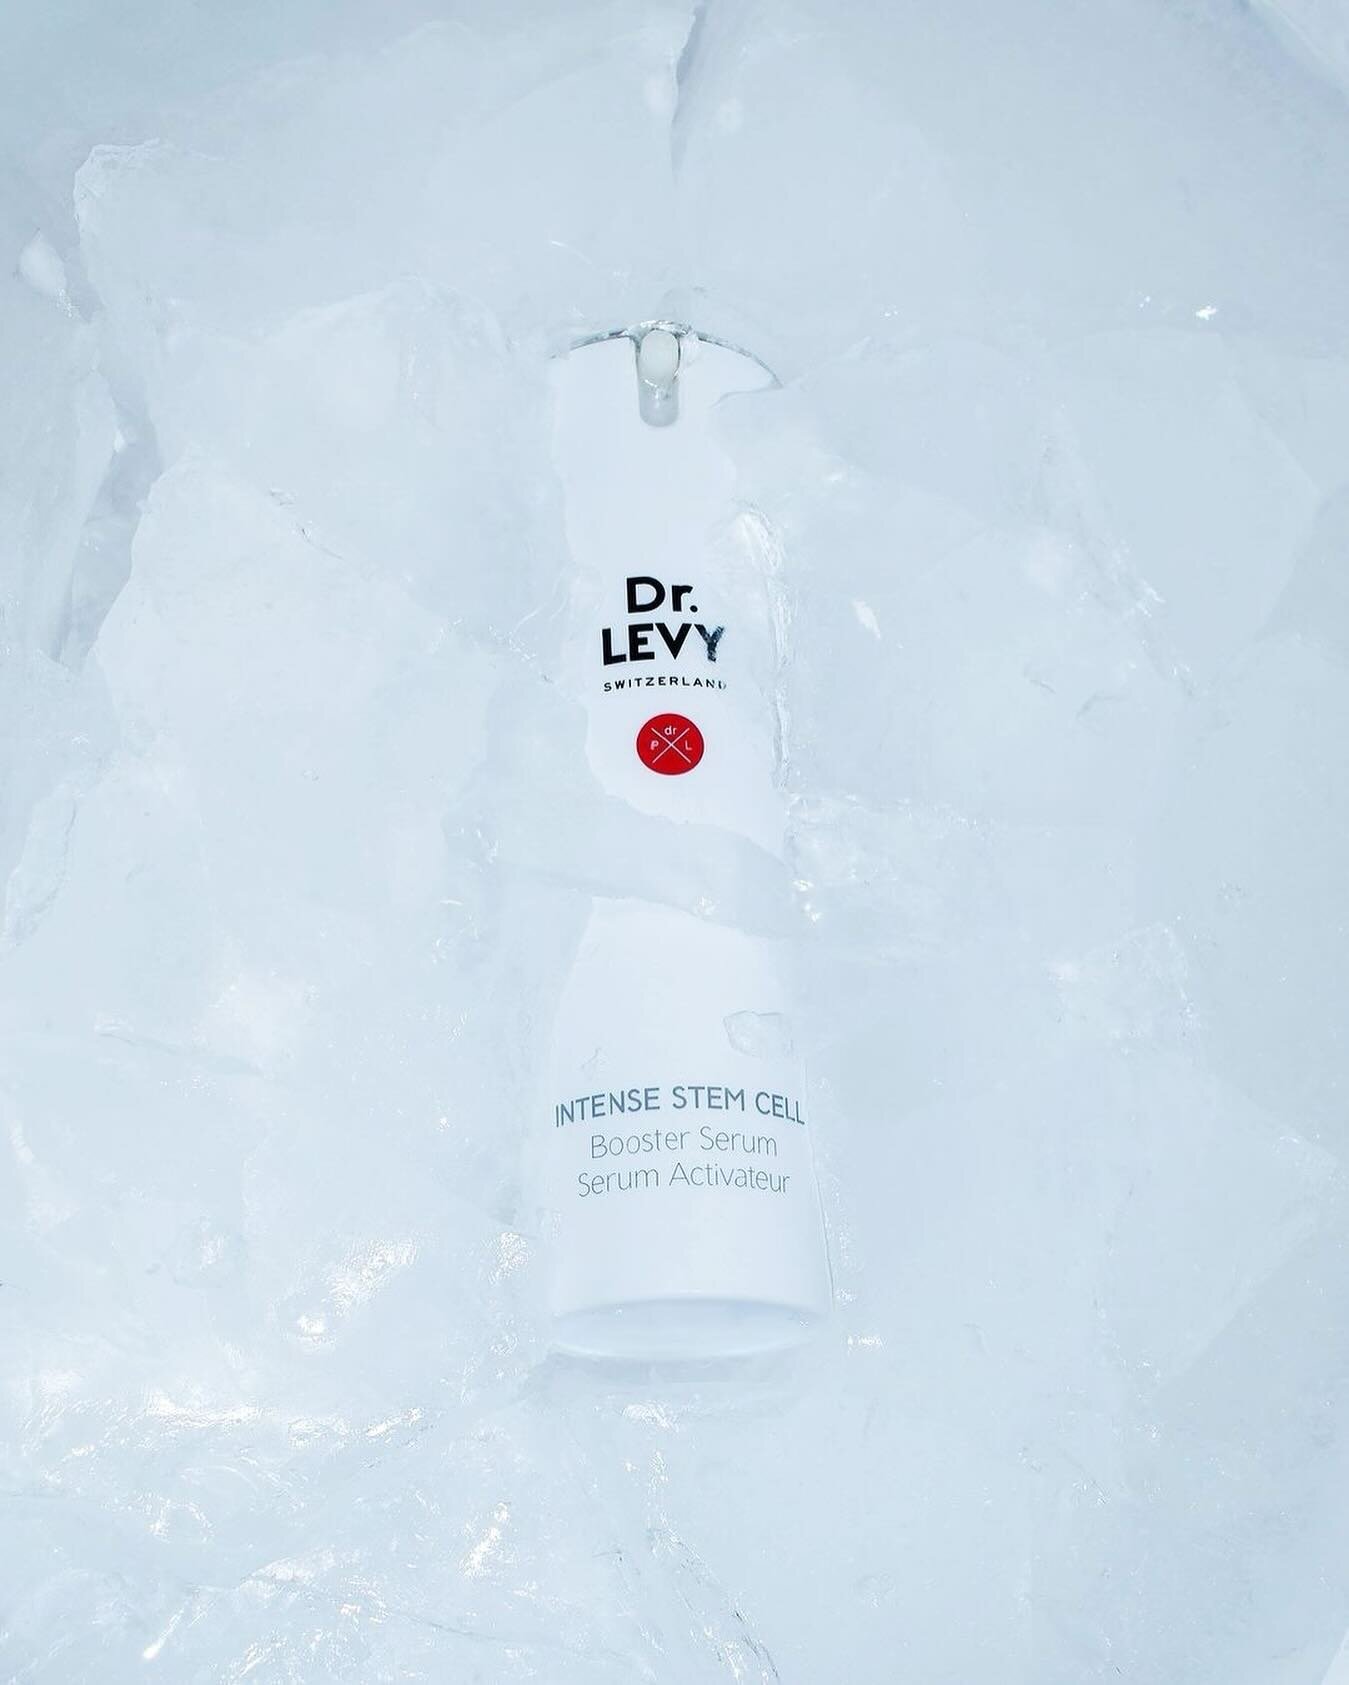 Dr. LEVY Switzerland&nbsp;is the first cosmeceutical proven to stimulate dermal stem cells. Harnessing a Nobel Prize-winning discovery, that ageing is reversible, @drlevyofficial skincare is proven to revitalise the dermal stem cells that create esse